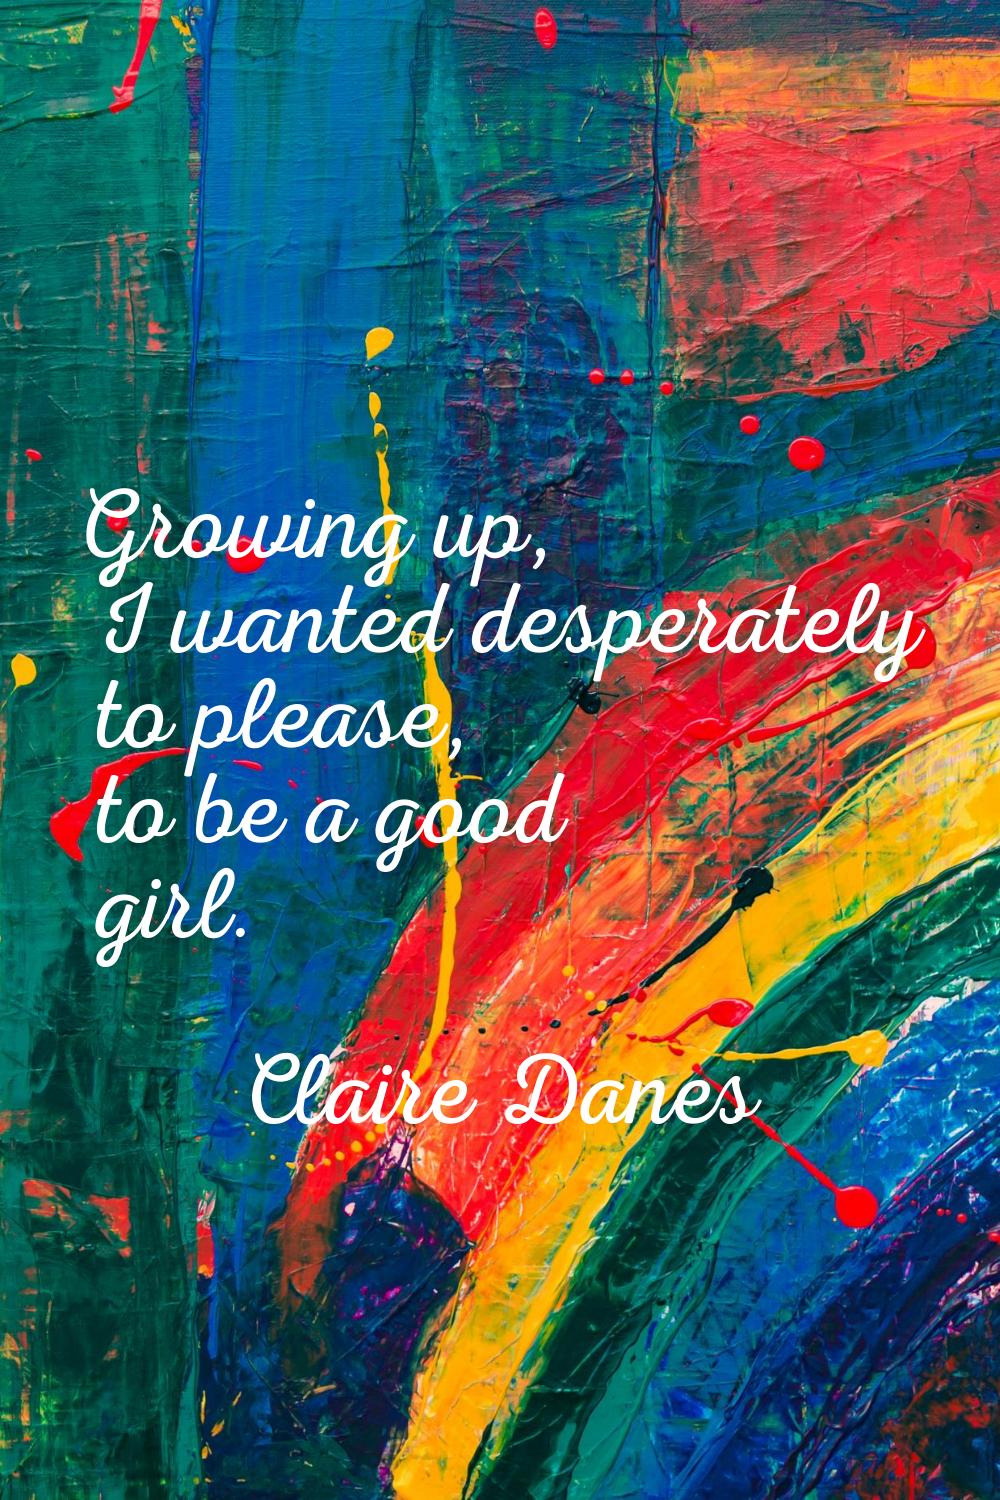 Growing up, I wanted desperately to please, to be a good girl.